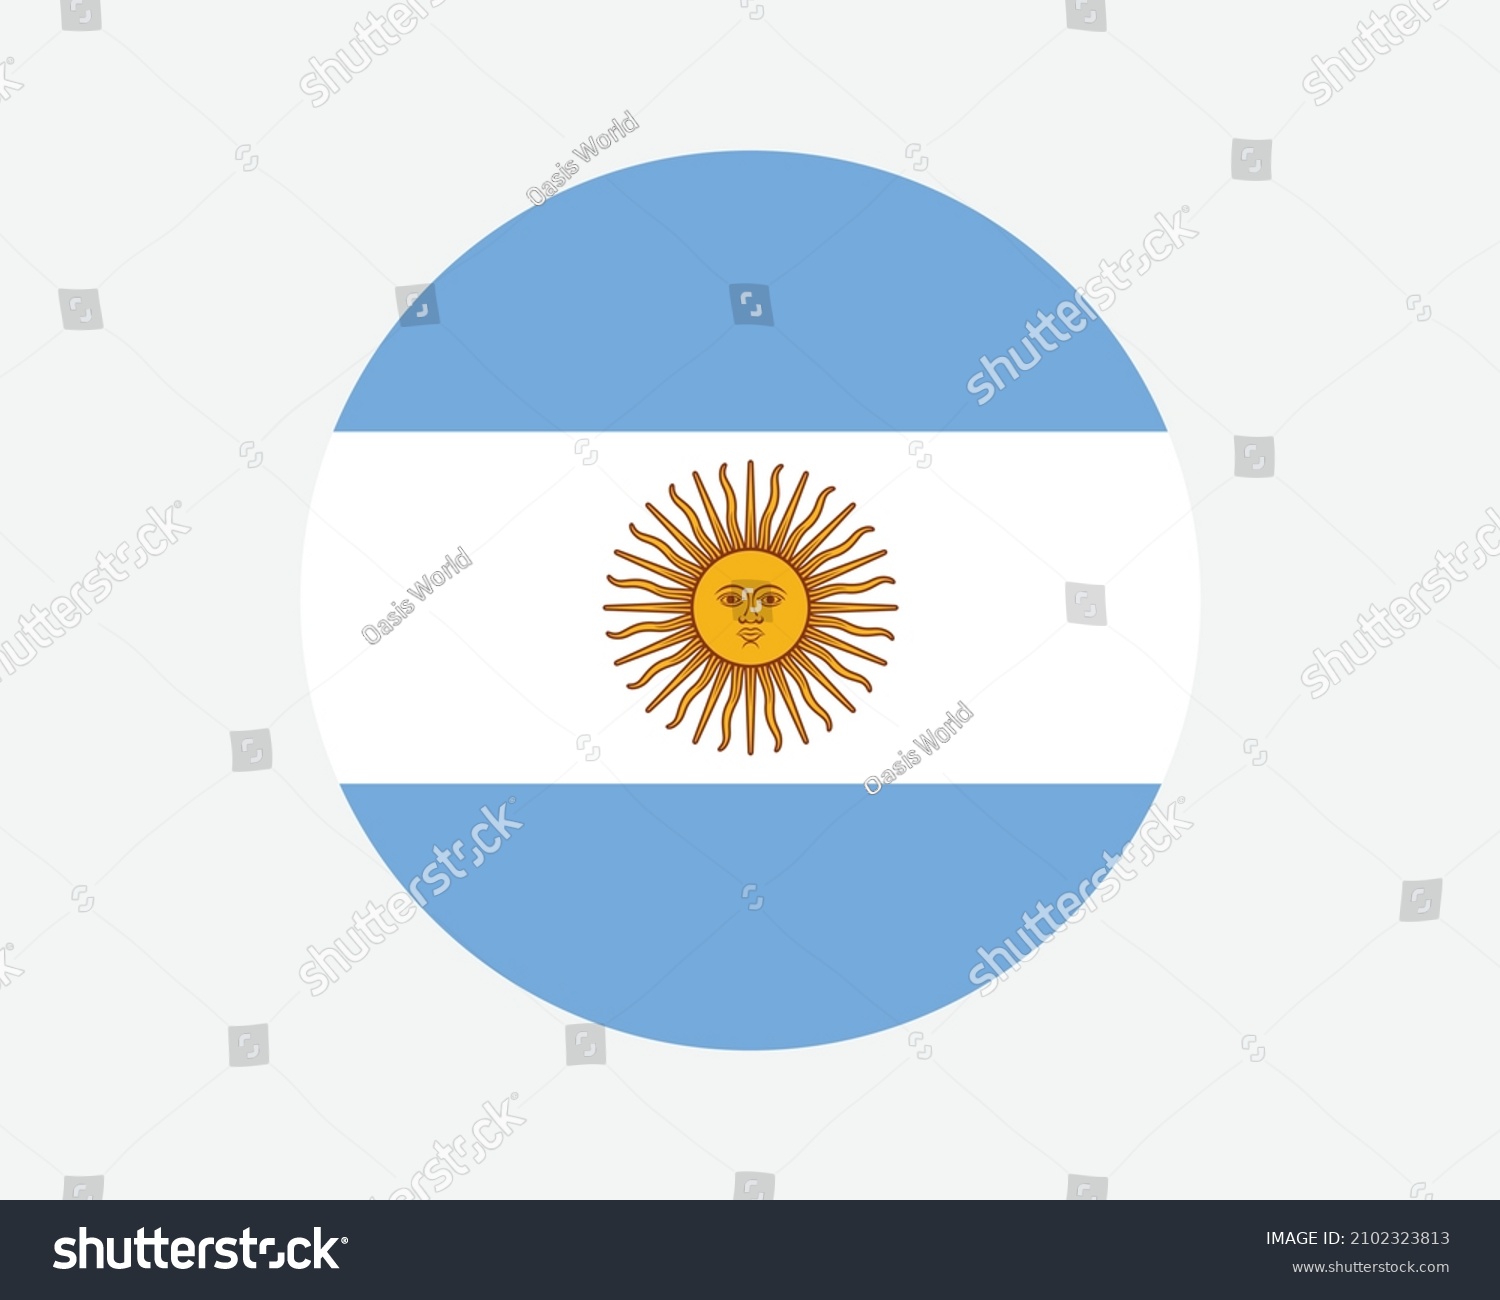 SVG of Argentina Round Country Flag. Circular Argentinian National Flag. Argentine Republic Circle Shape Button Banner. EPS Vector Illustration. svg